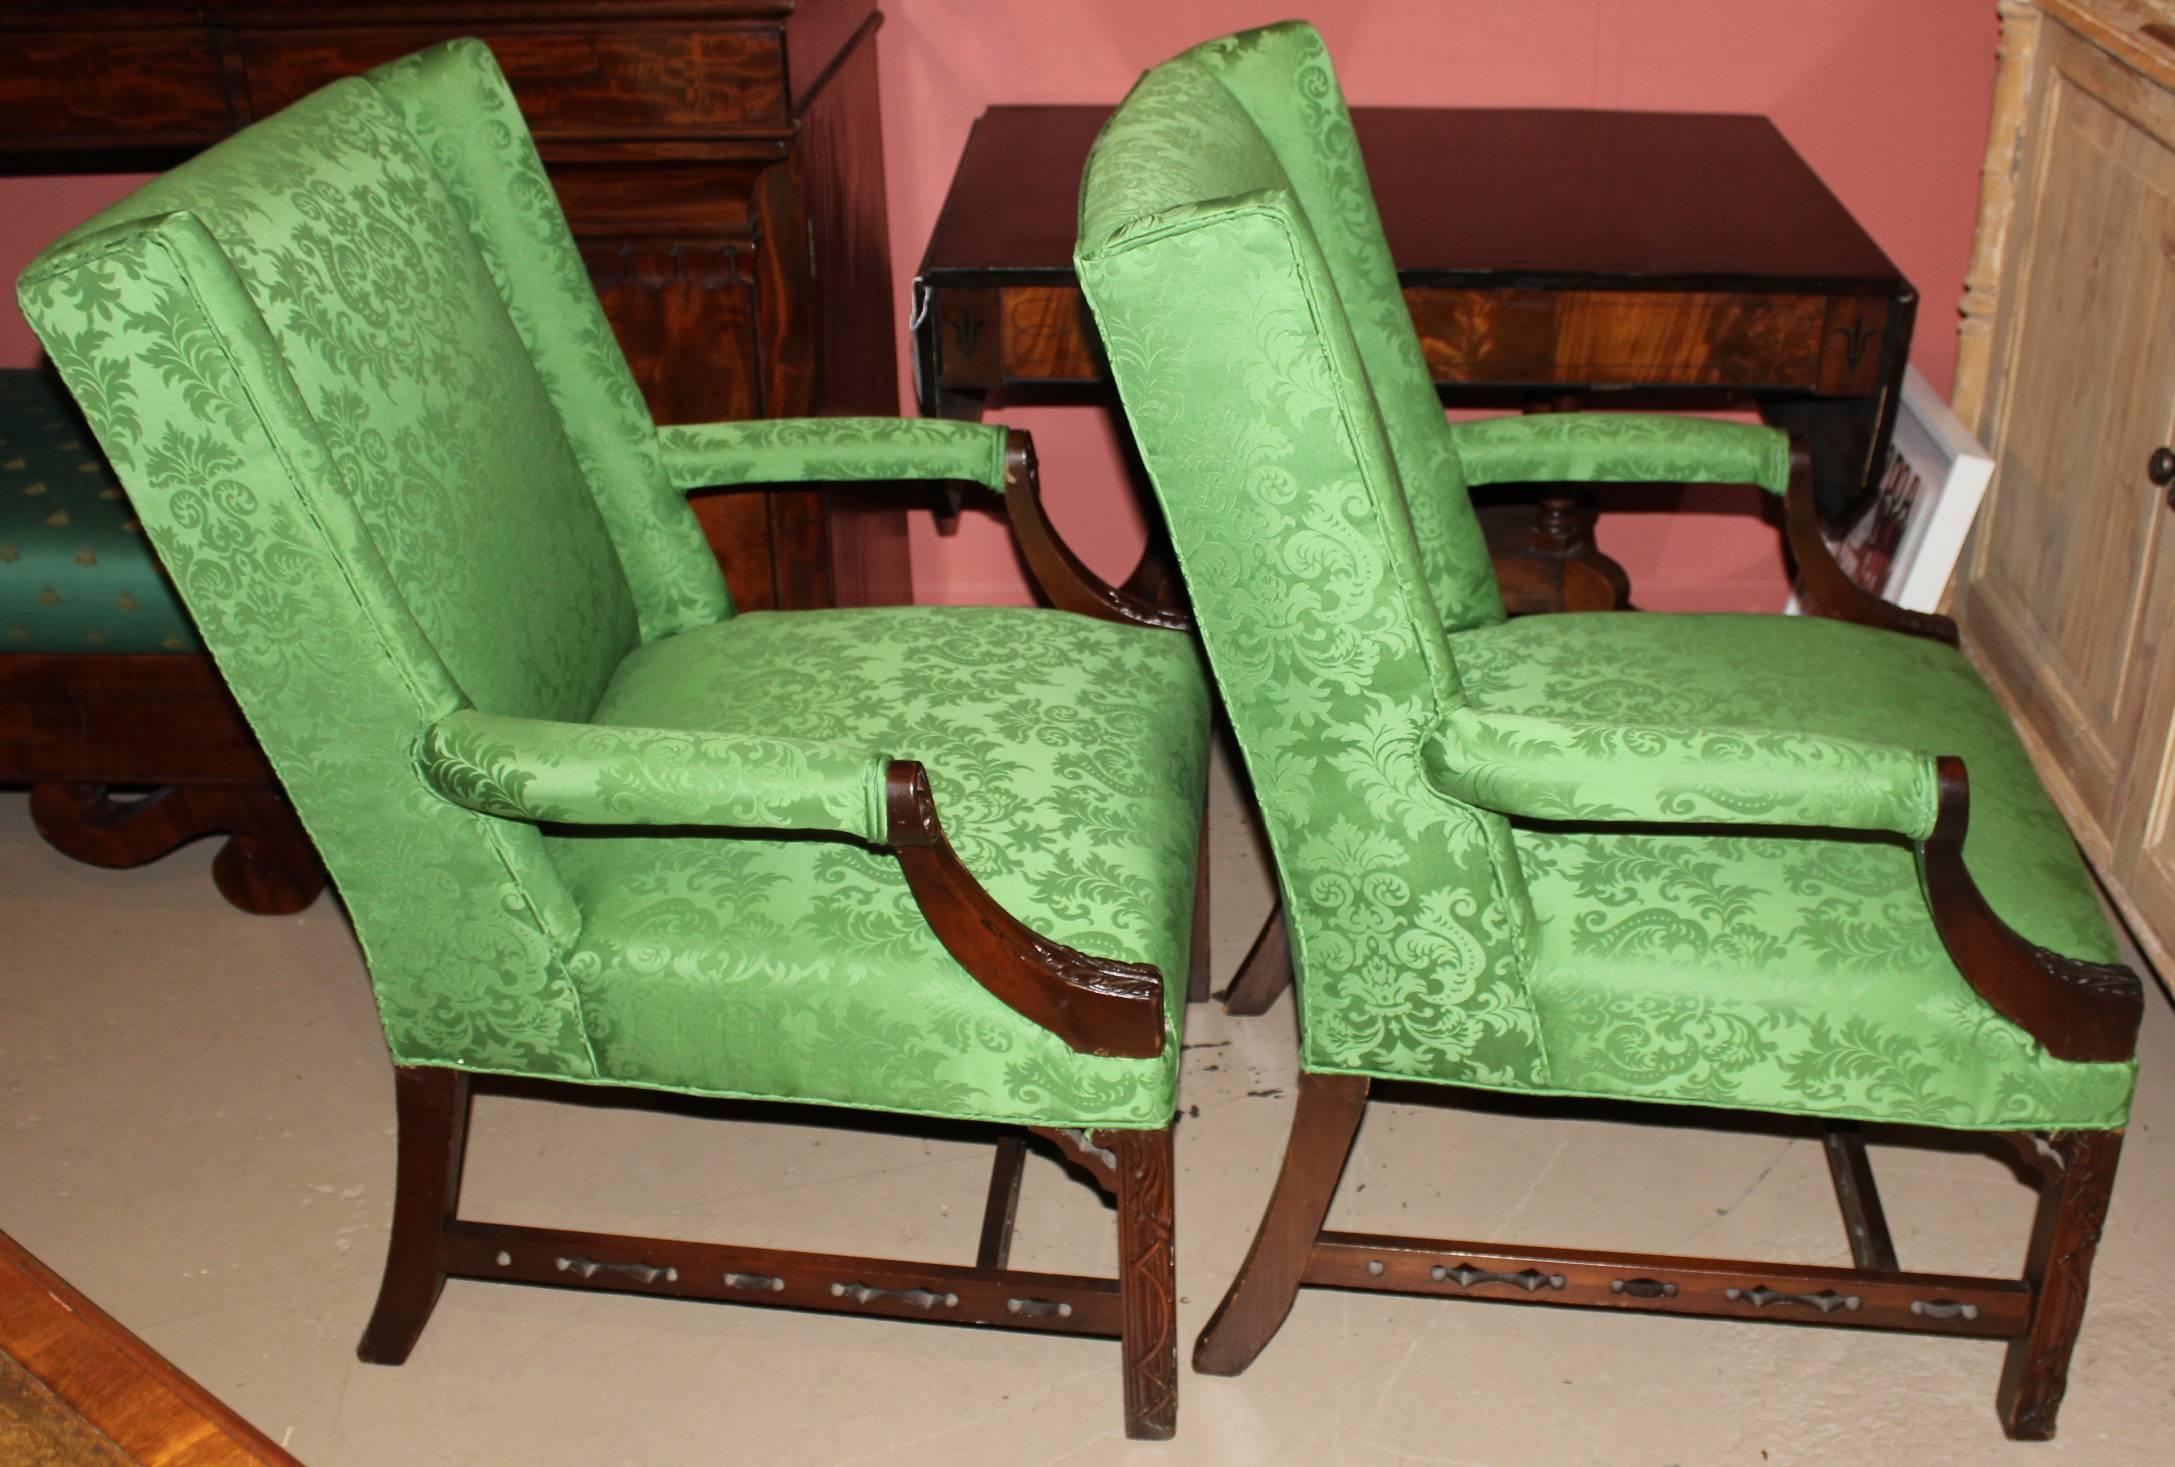 A fine pair of Chinese Chippendale style mahogany Marlborough chairs with nicely foliate carved detail on the arms and legs, as well as pierce carved stretchers, dating to the 19th century. Very good overall condition, with minor edge losses.